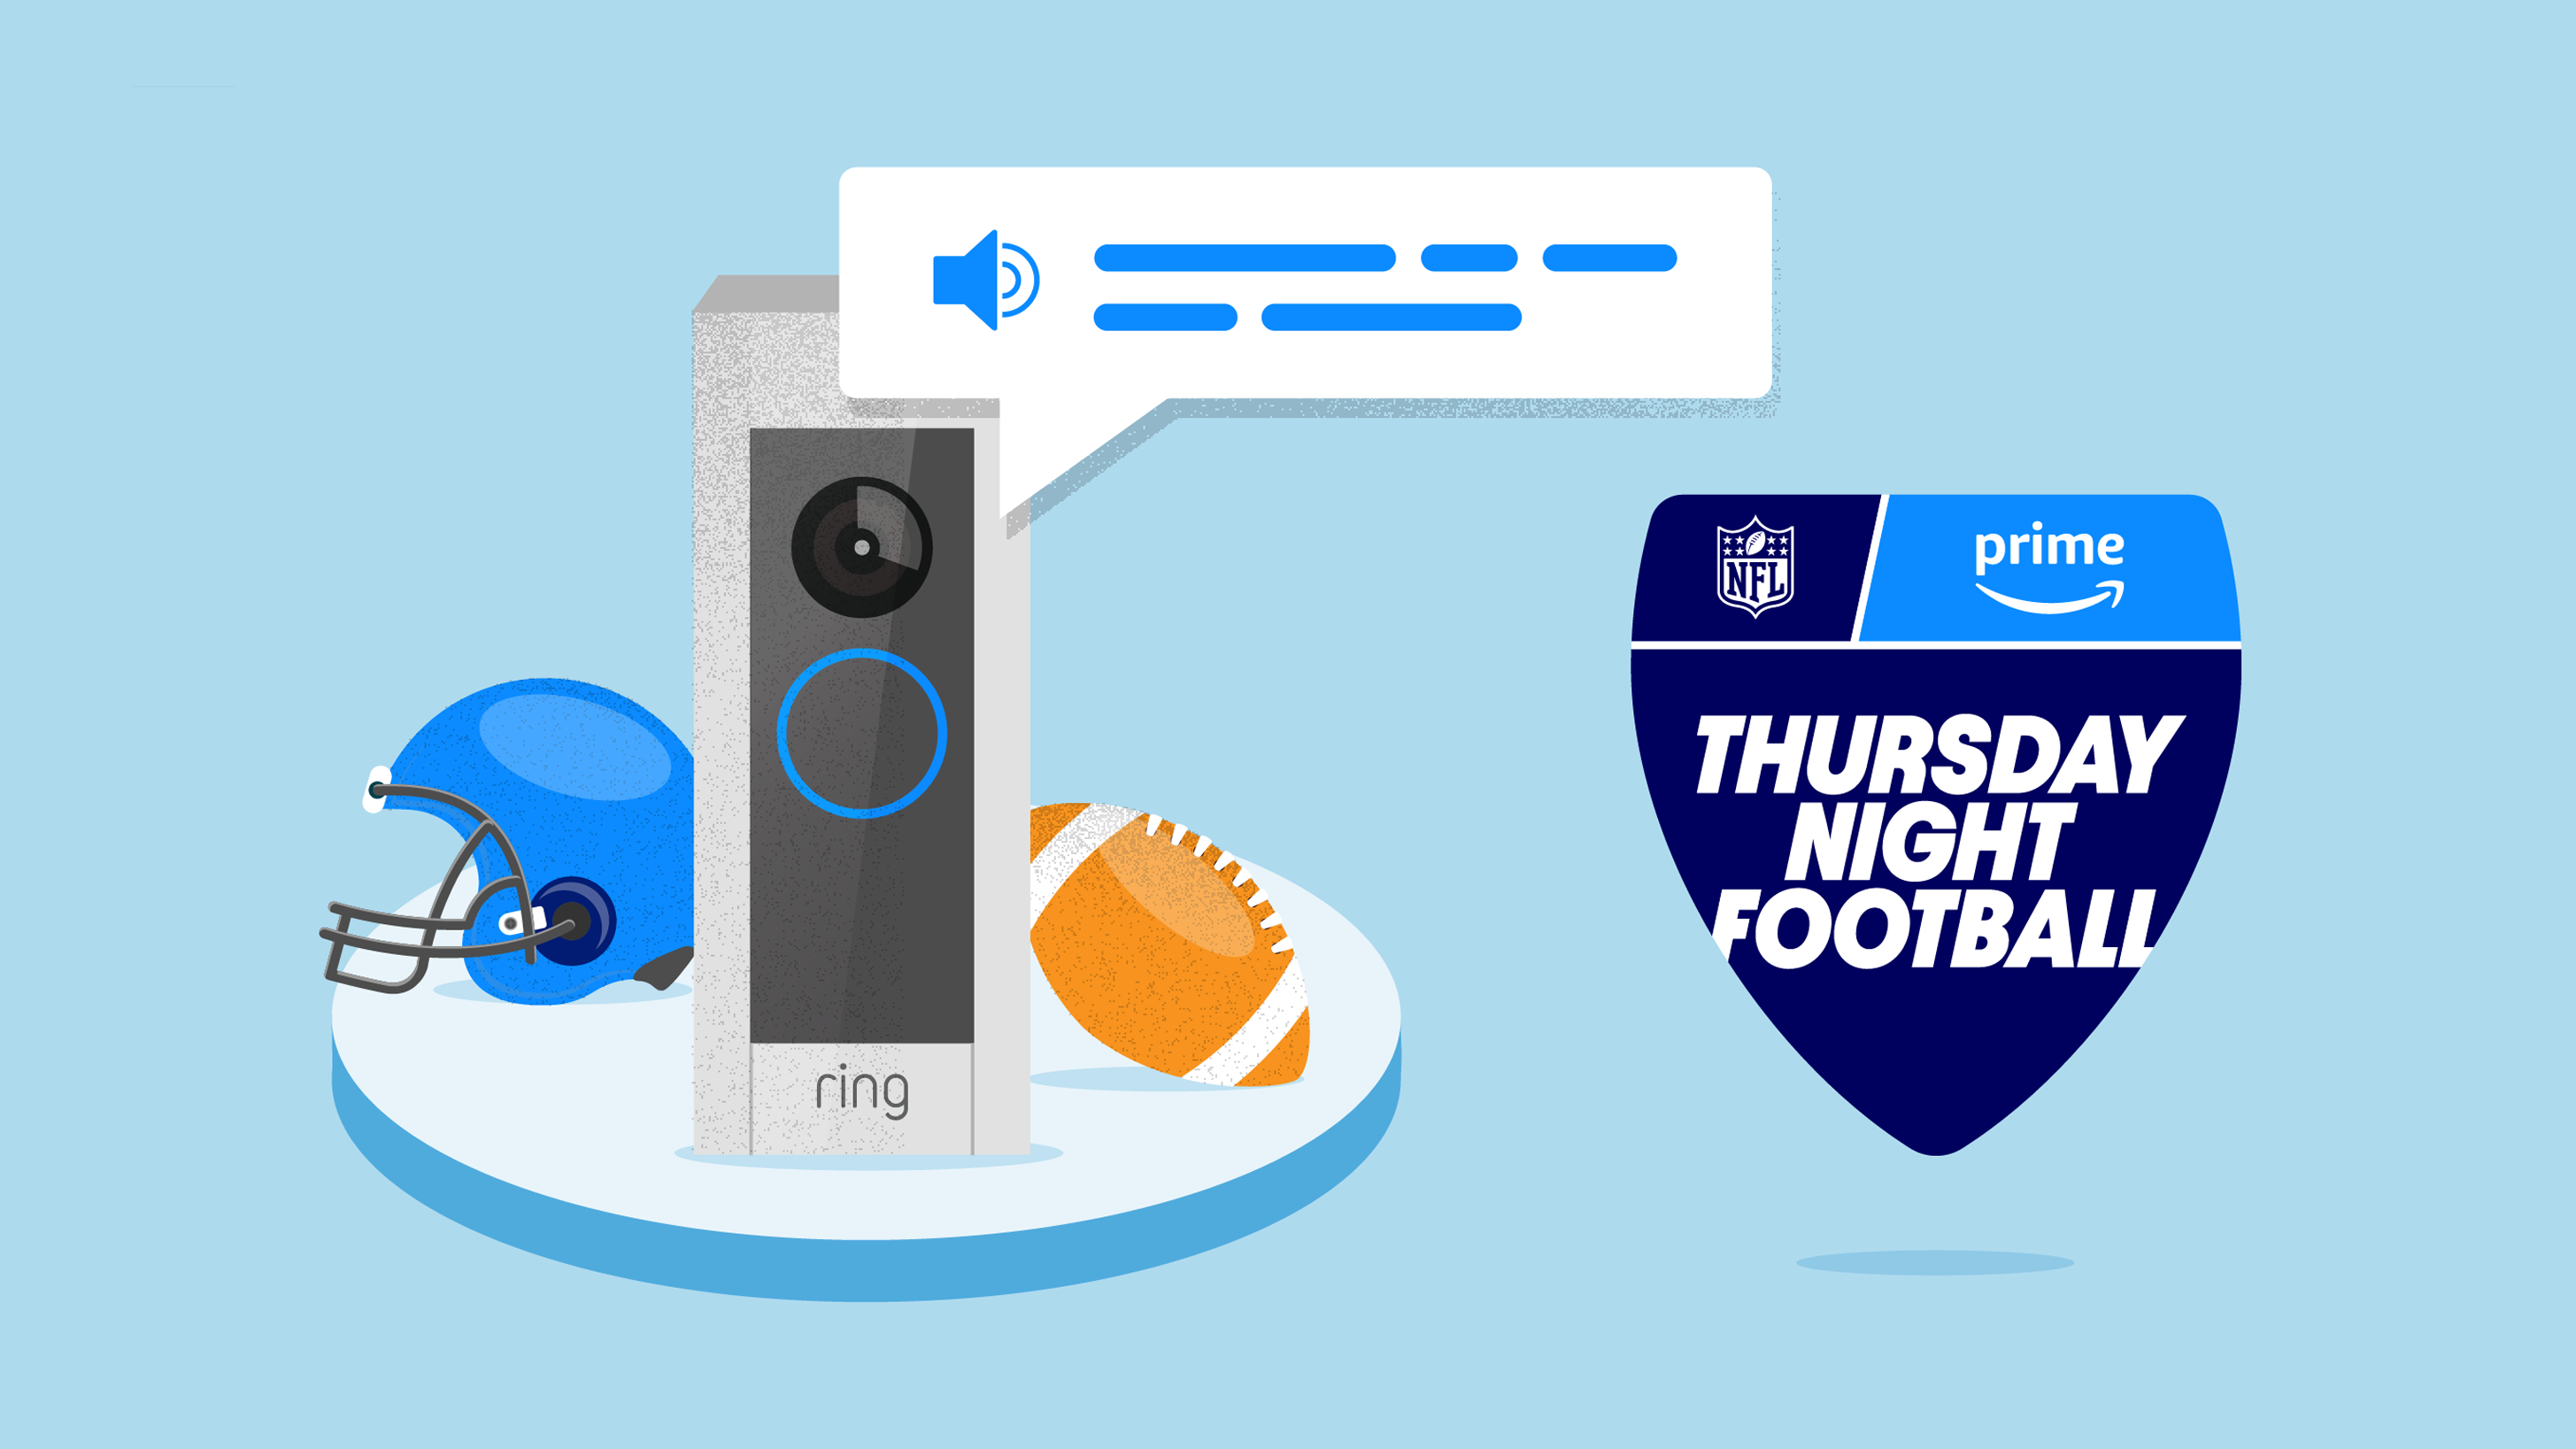 Tune in to Thursday Night Football with help from Alexa